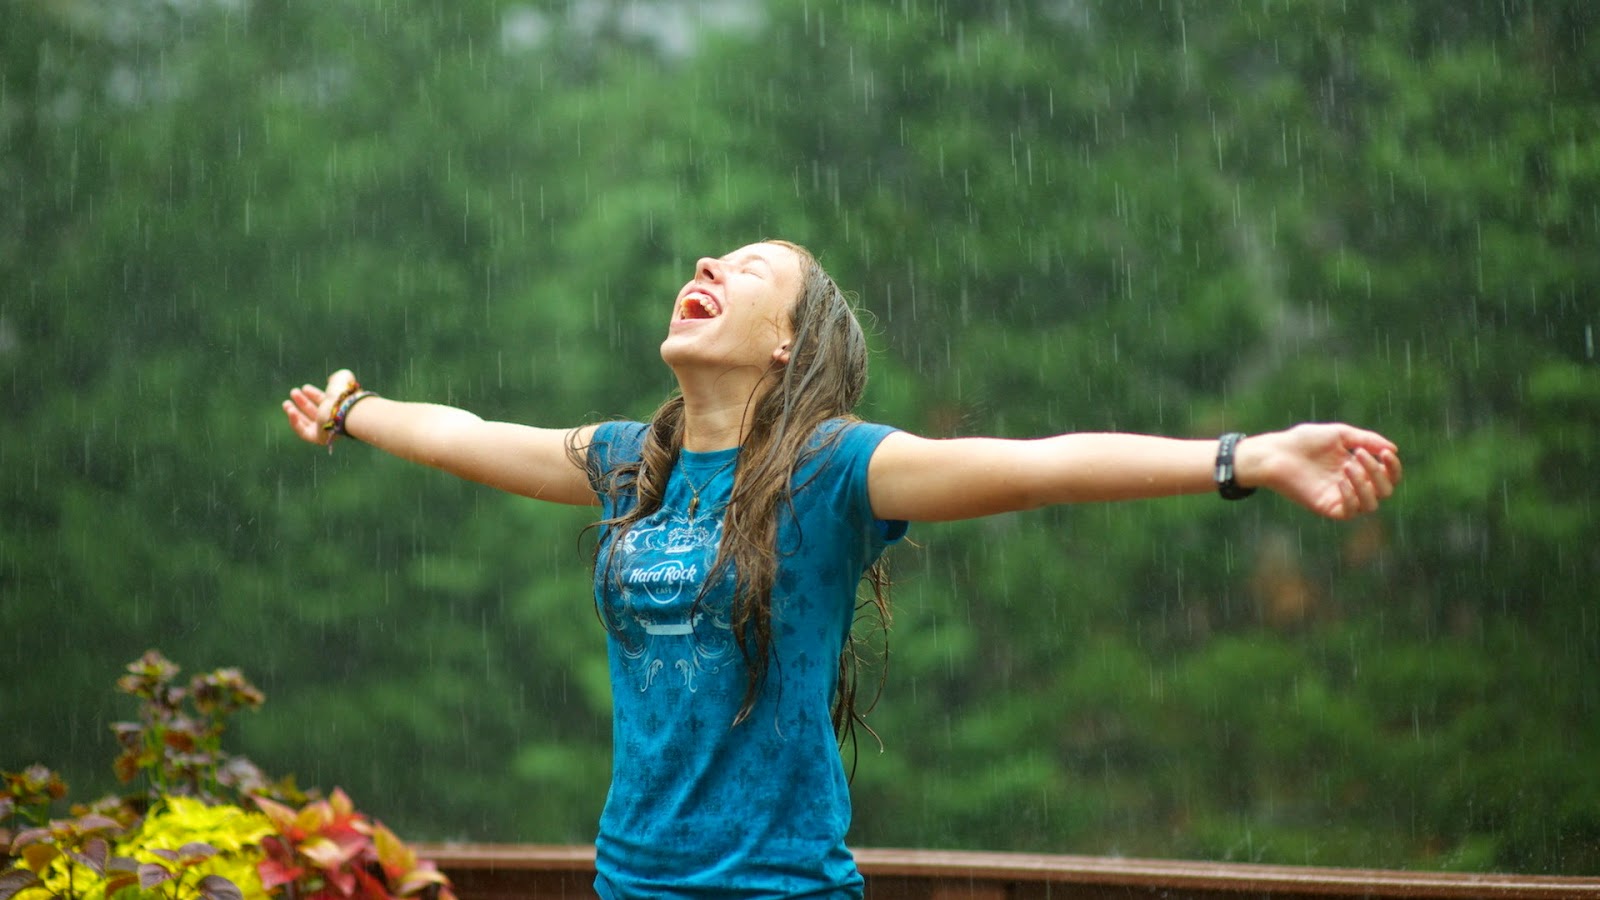 You get the amazing benefits of bathing with rain water बारिश